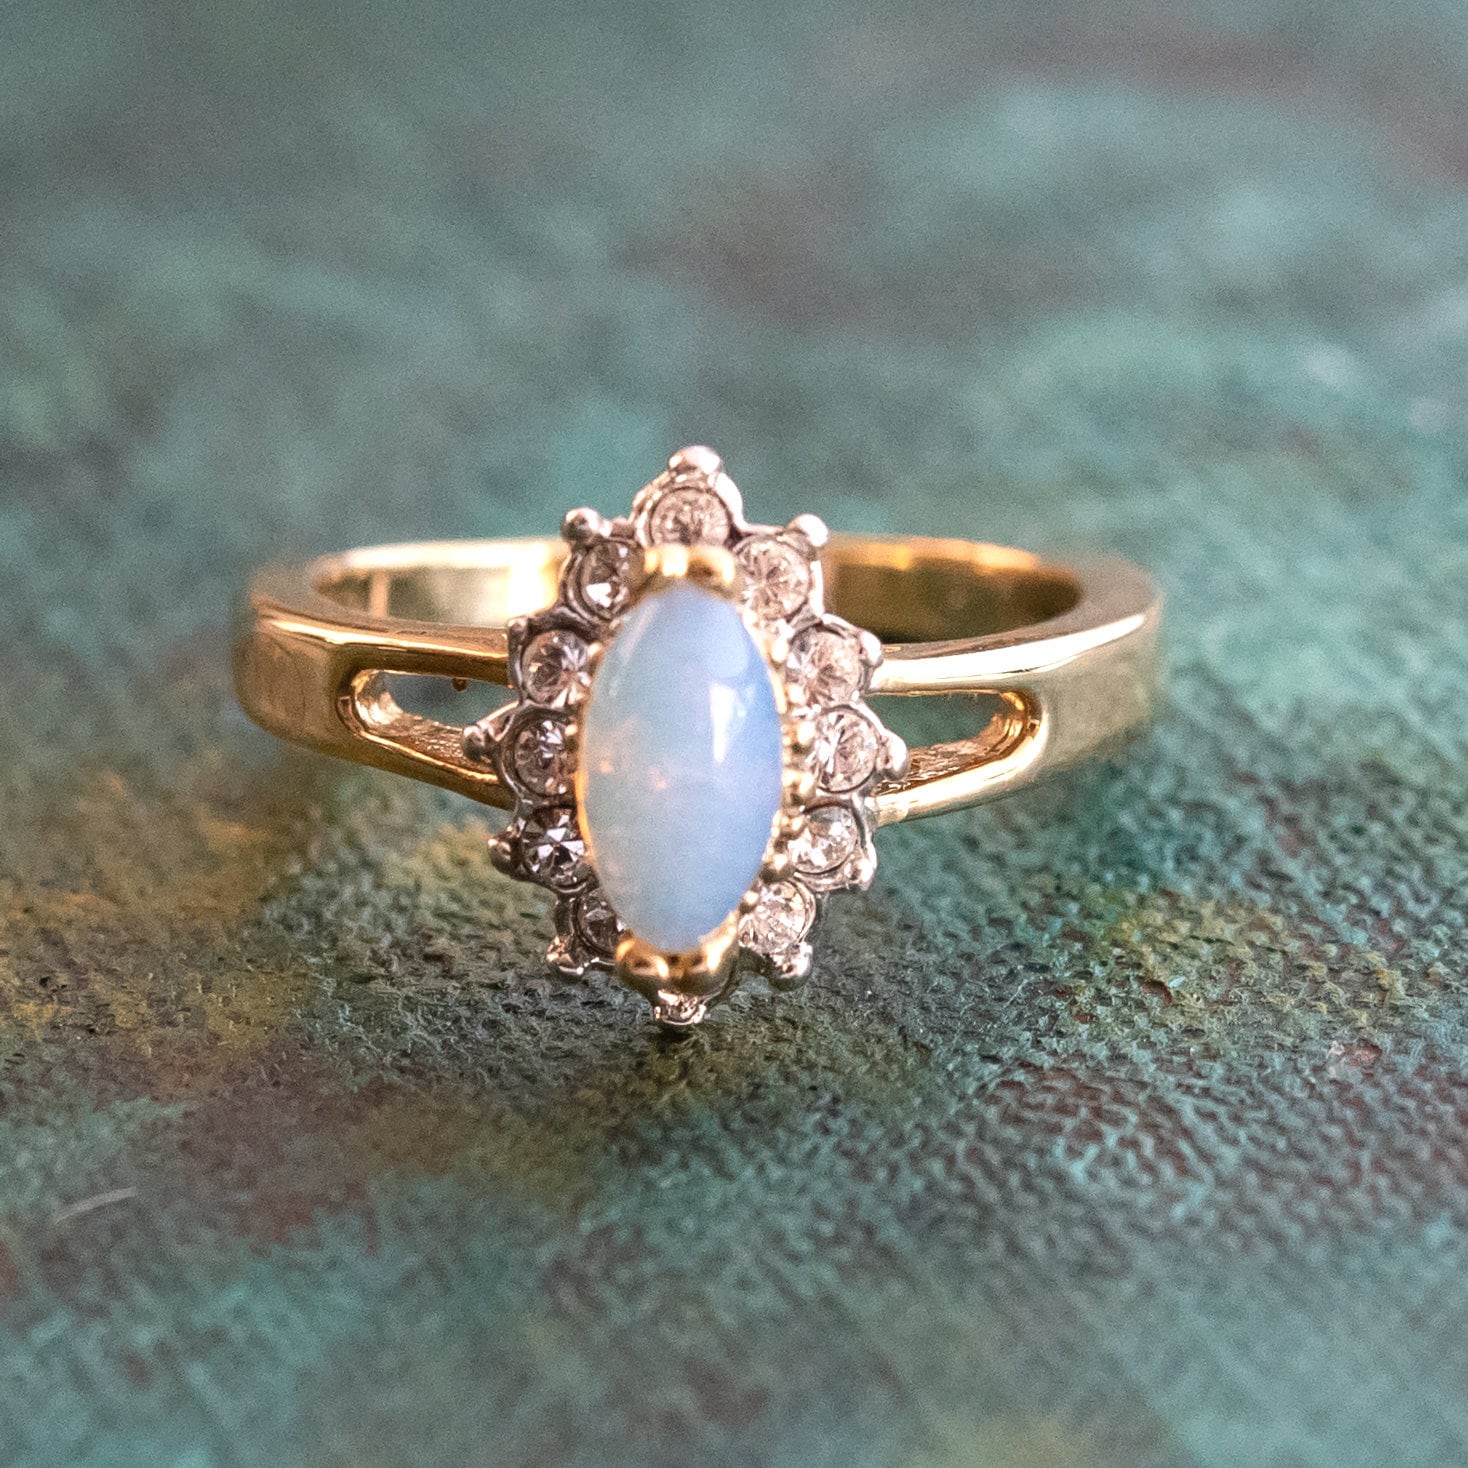 Vintage Ring Genuine Pinfire Opal Ring Engagement with Clear Swarovski Crystals October Birthstone Womans Jewlery #R1314 - LIMITED SUPPLY